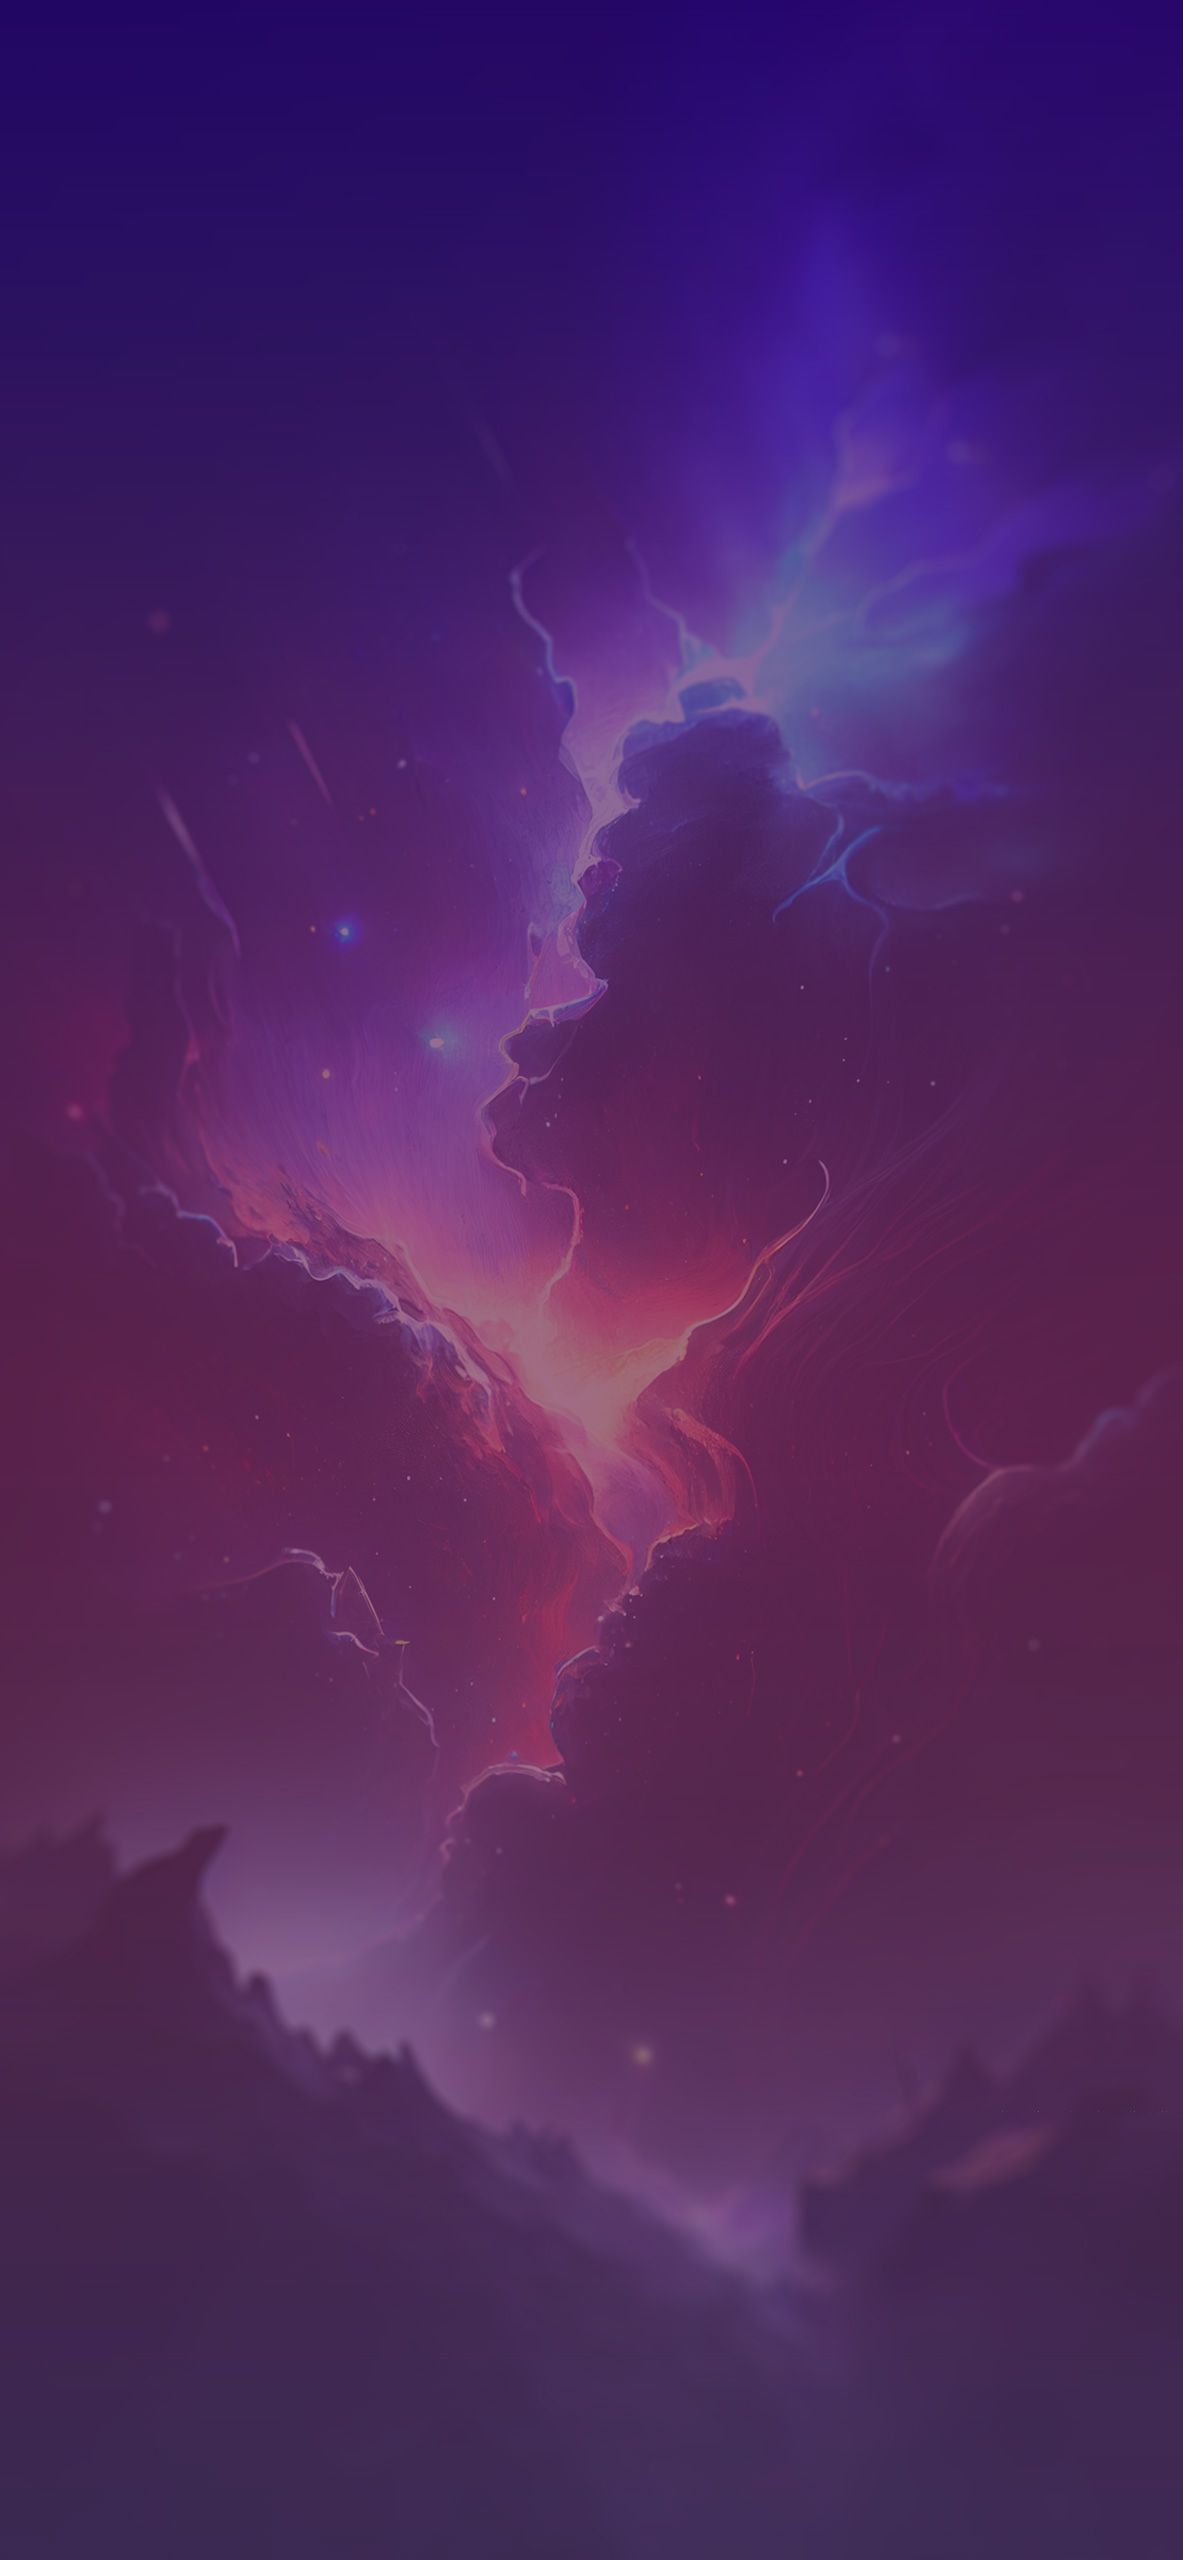 1440x2560 wallpaper of a purple and blue sky with clouds - Galaxy, lightning, storm